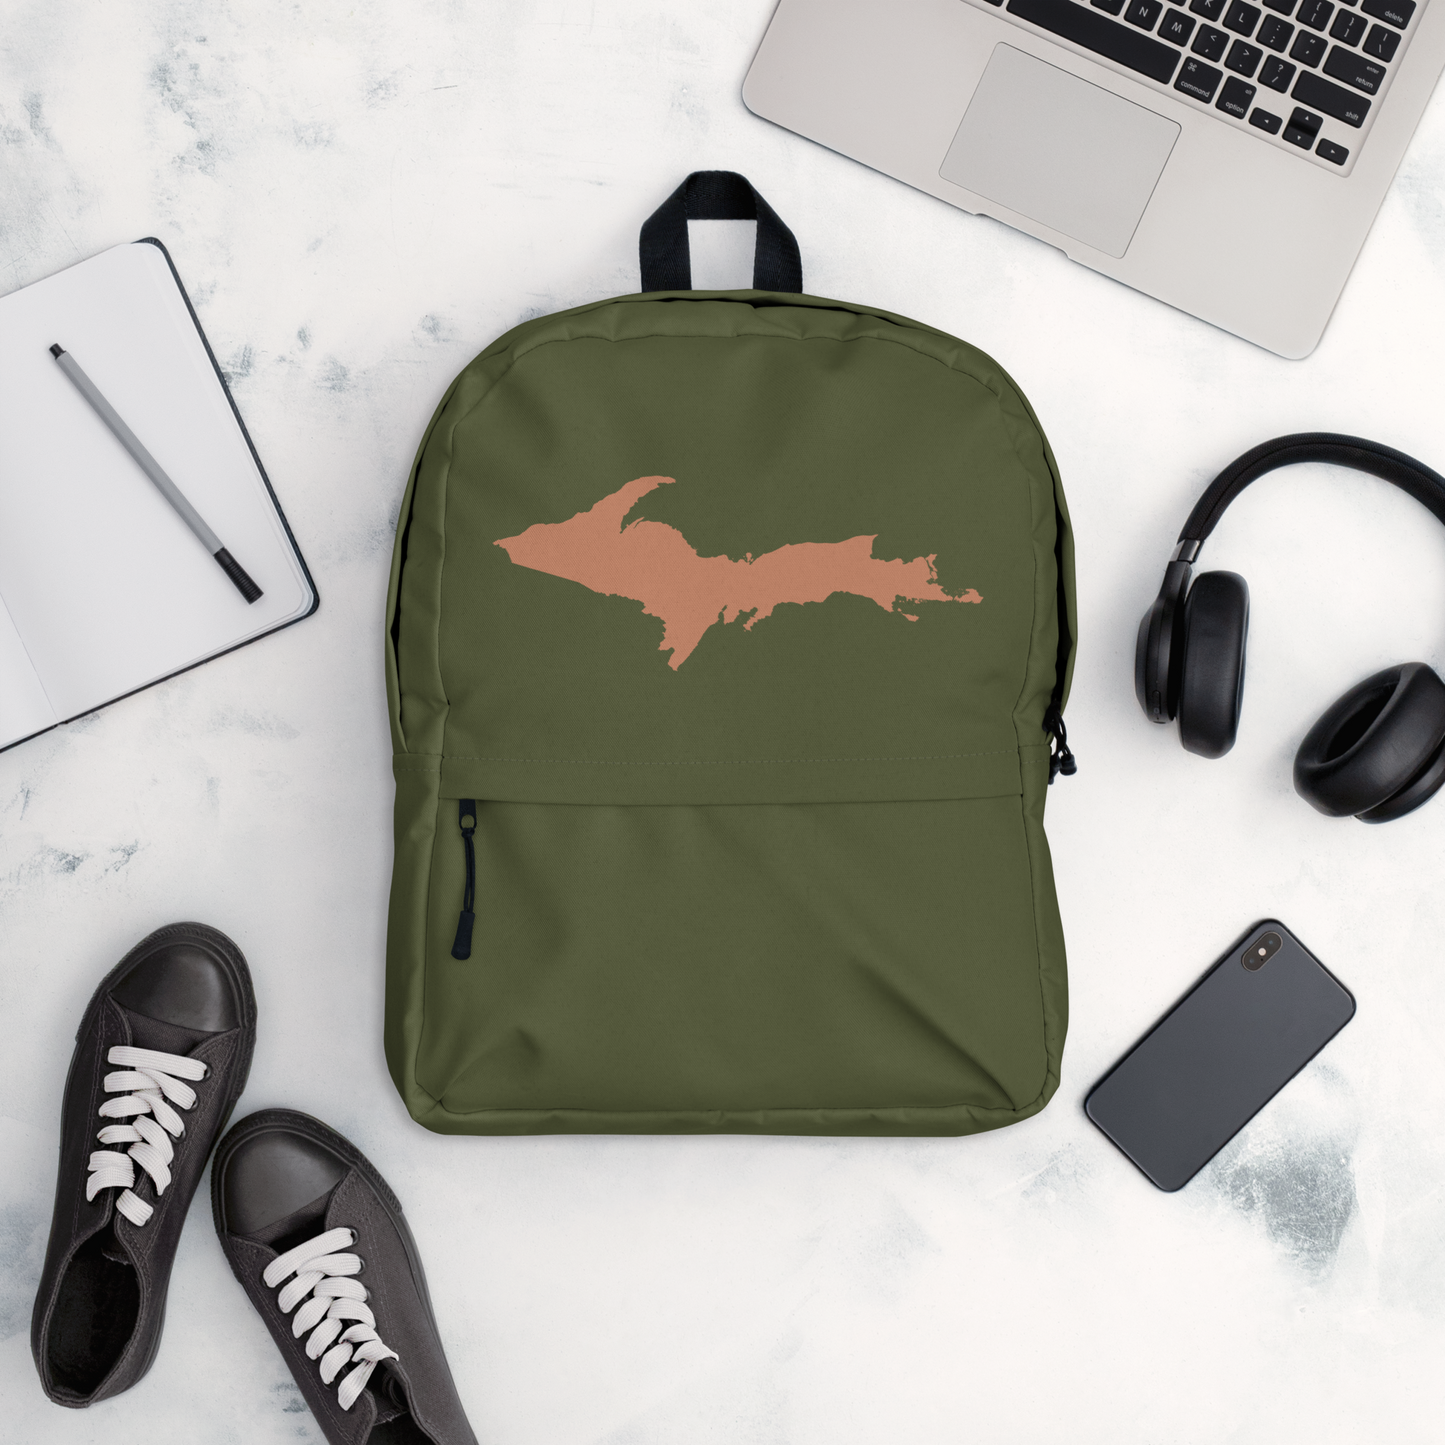 Michigan Upper Peninsula Standard Backpack (w/ Copper UP Outline) | Army Green